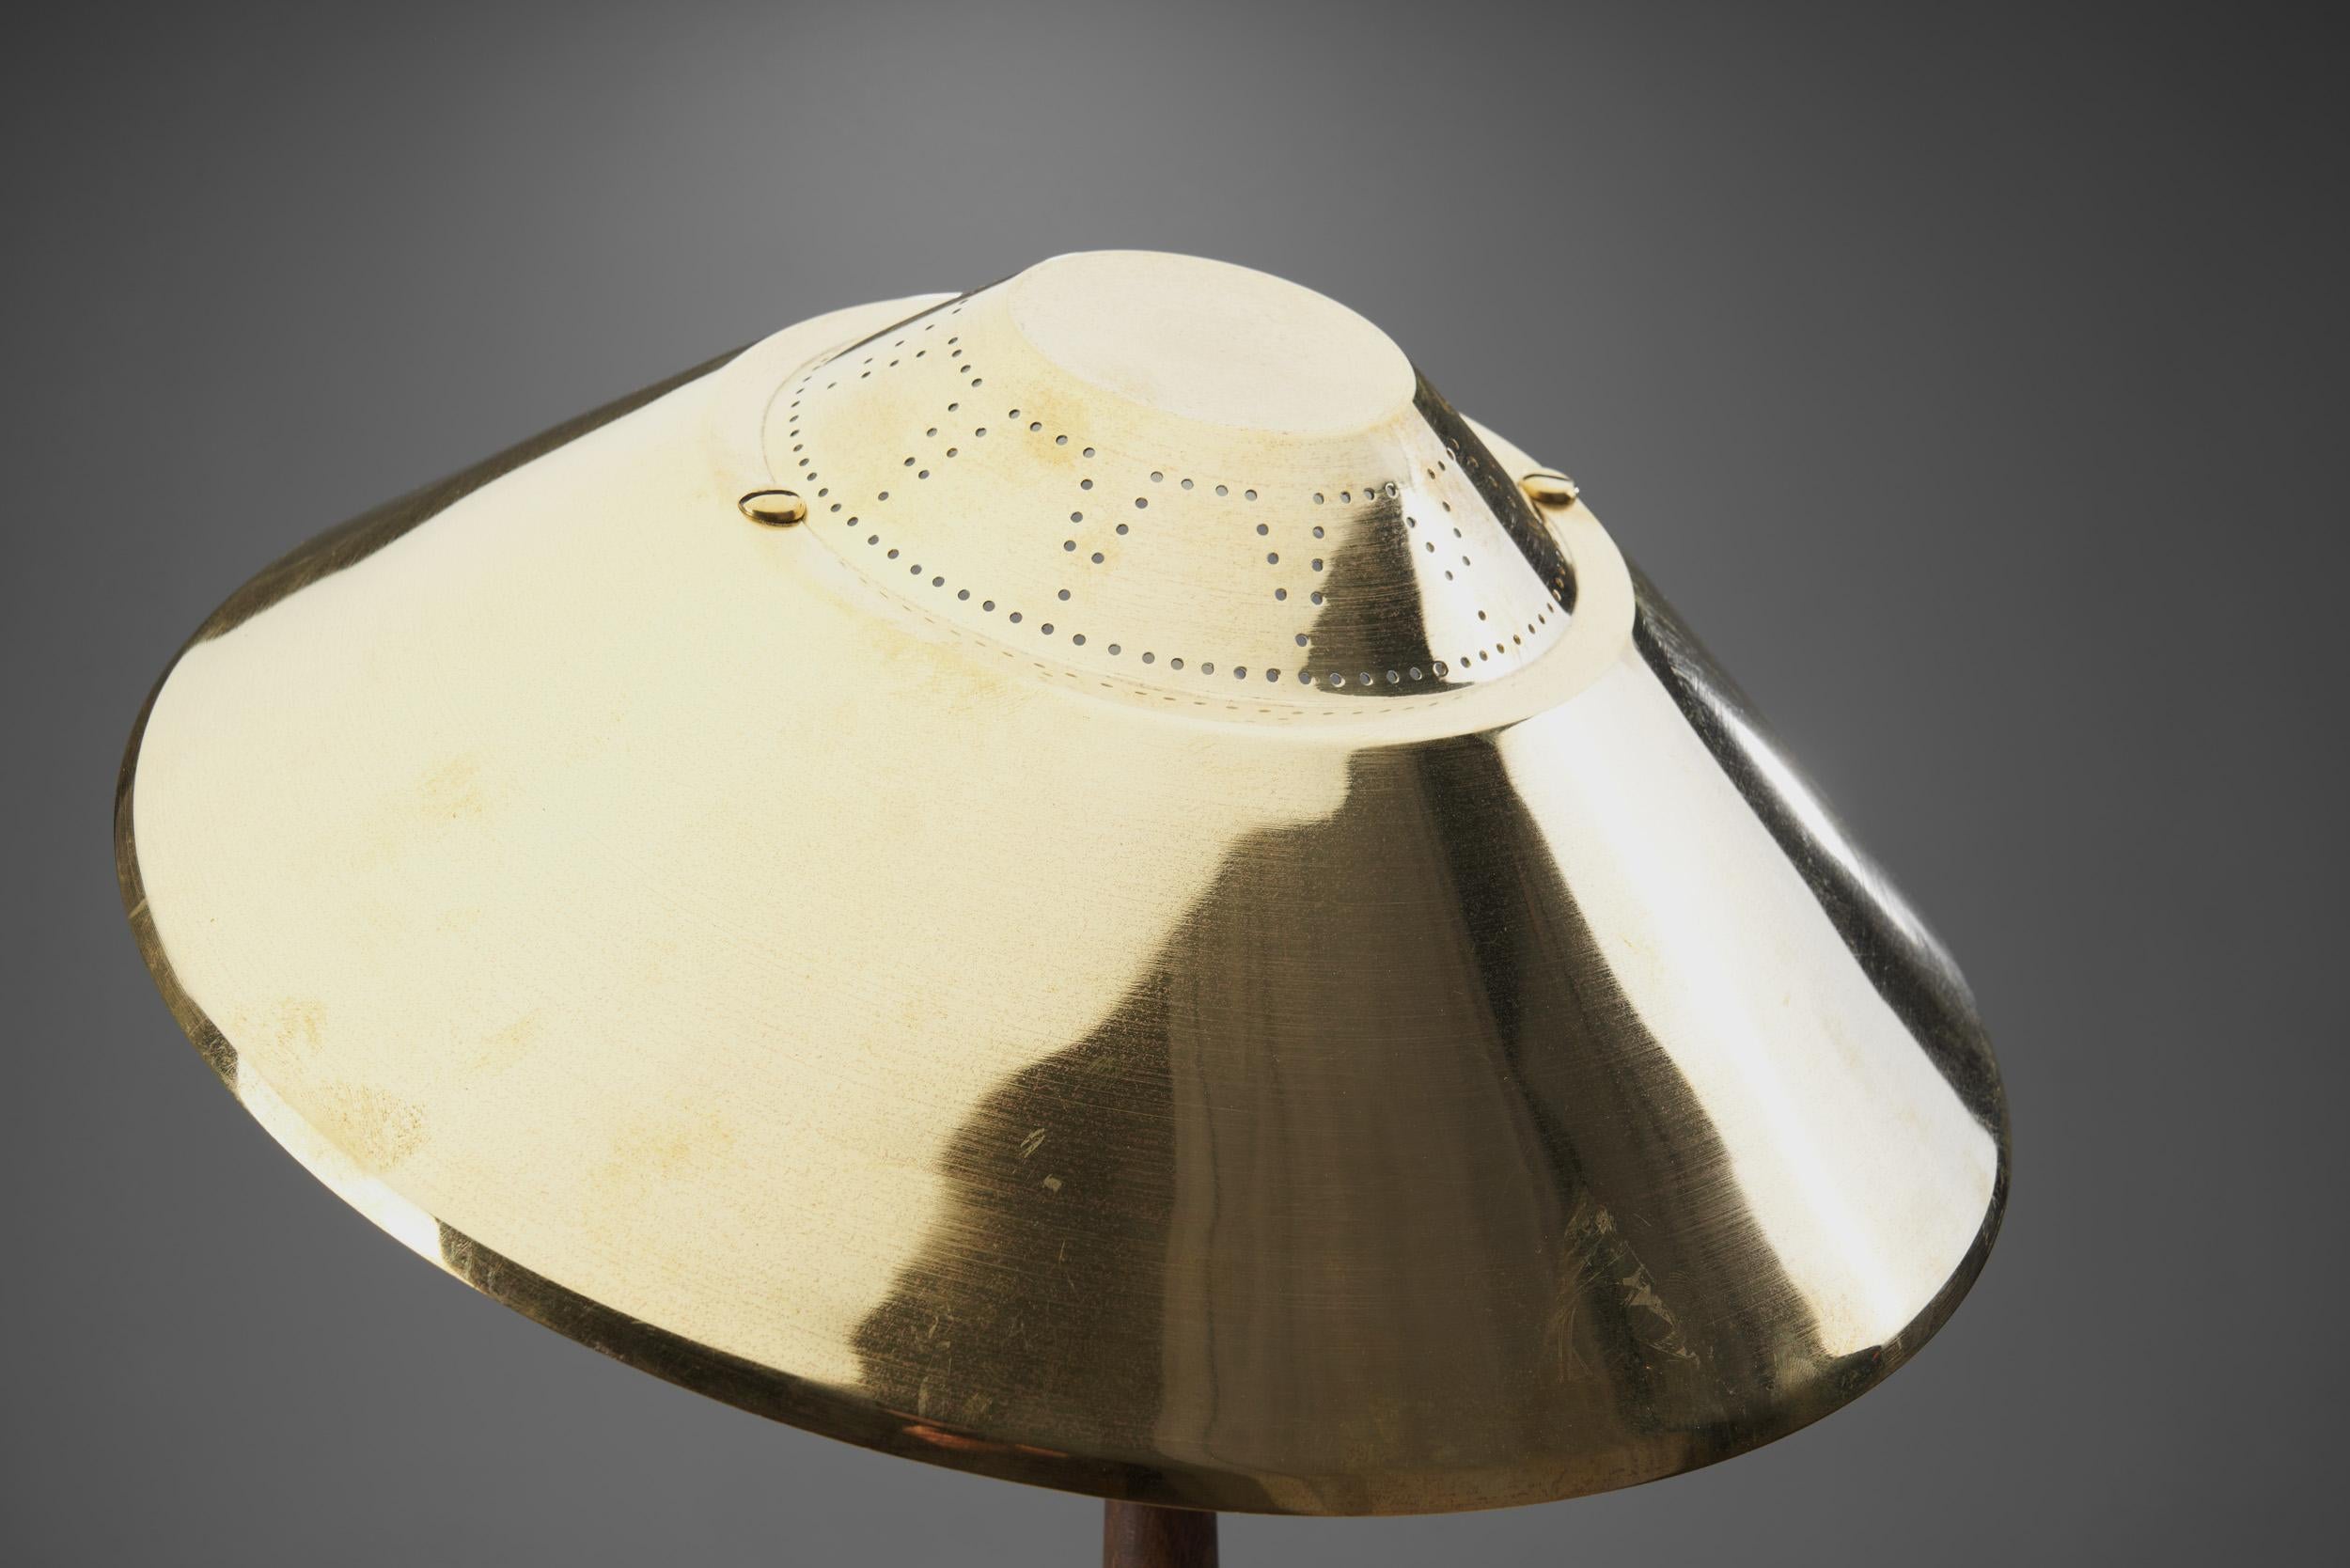 AB E. Hansson & Co. Brass Table Lamp with Adjustable Shade, Sweden 1950s For Sale 2